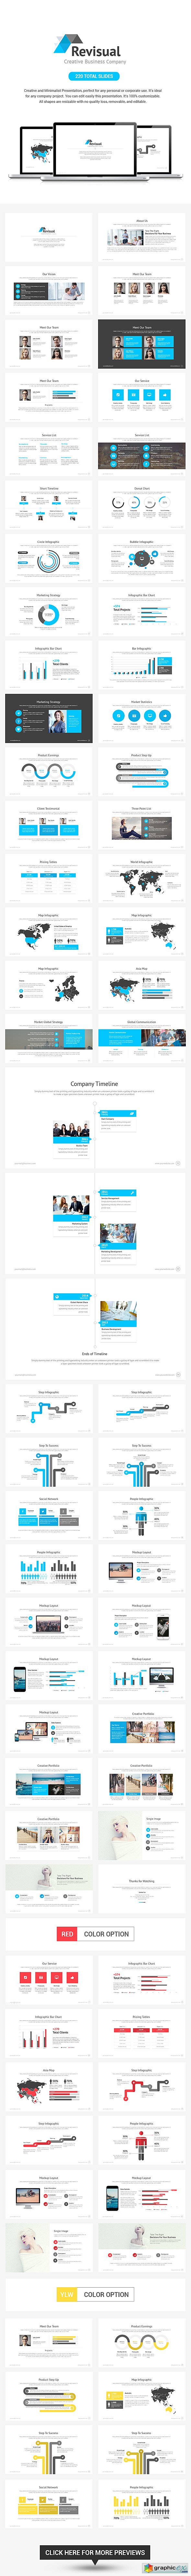 Revisual Powerpoint Template 9537682